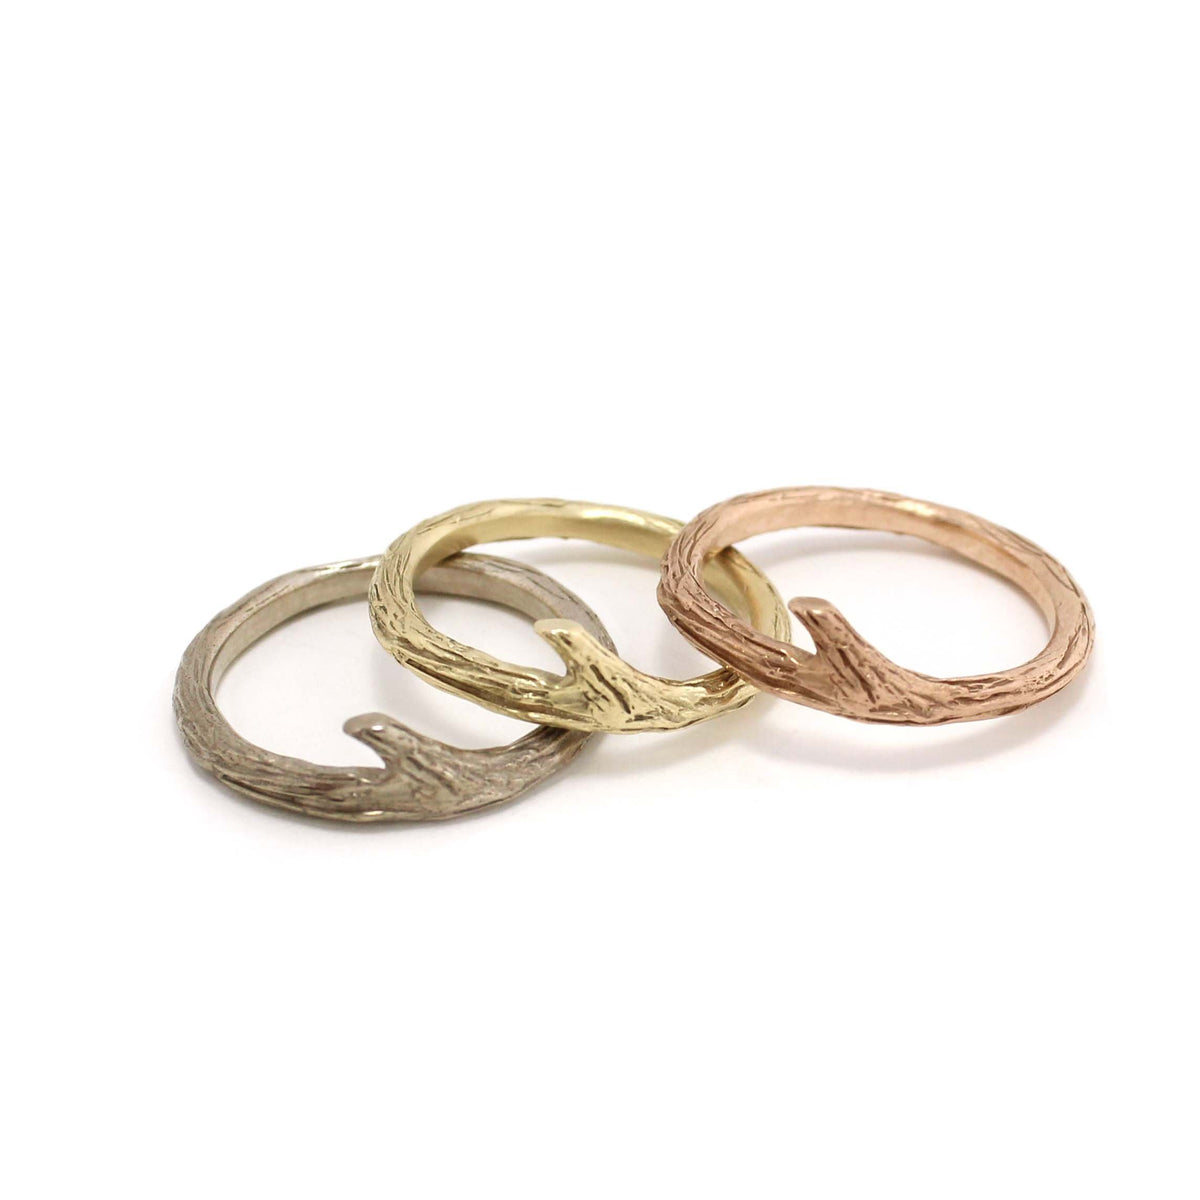 Gold Twig Branch Ring - your choice of gold - Wedding Ring 18K Palladium White Gold 14K Rose Gold 2570 - handmade by Beth Millner Jewelry